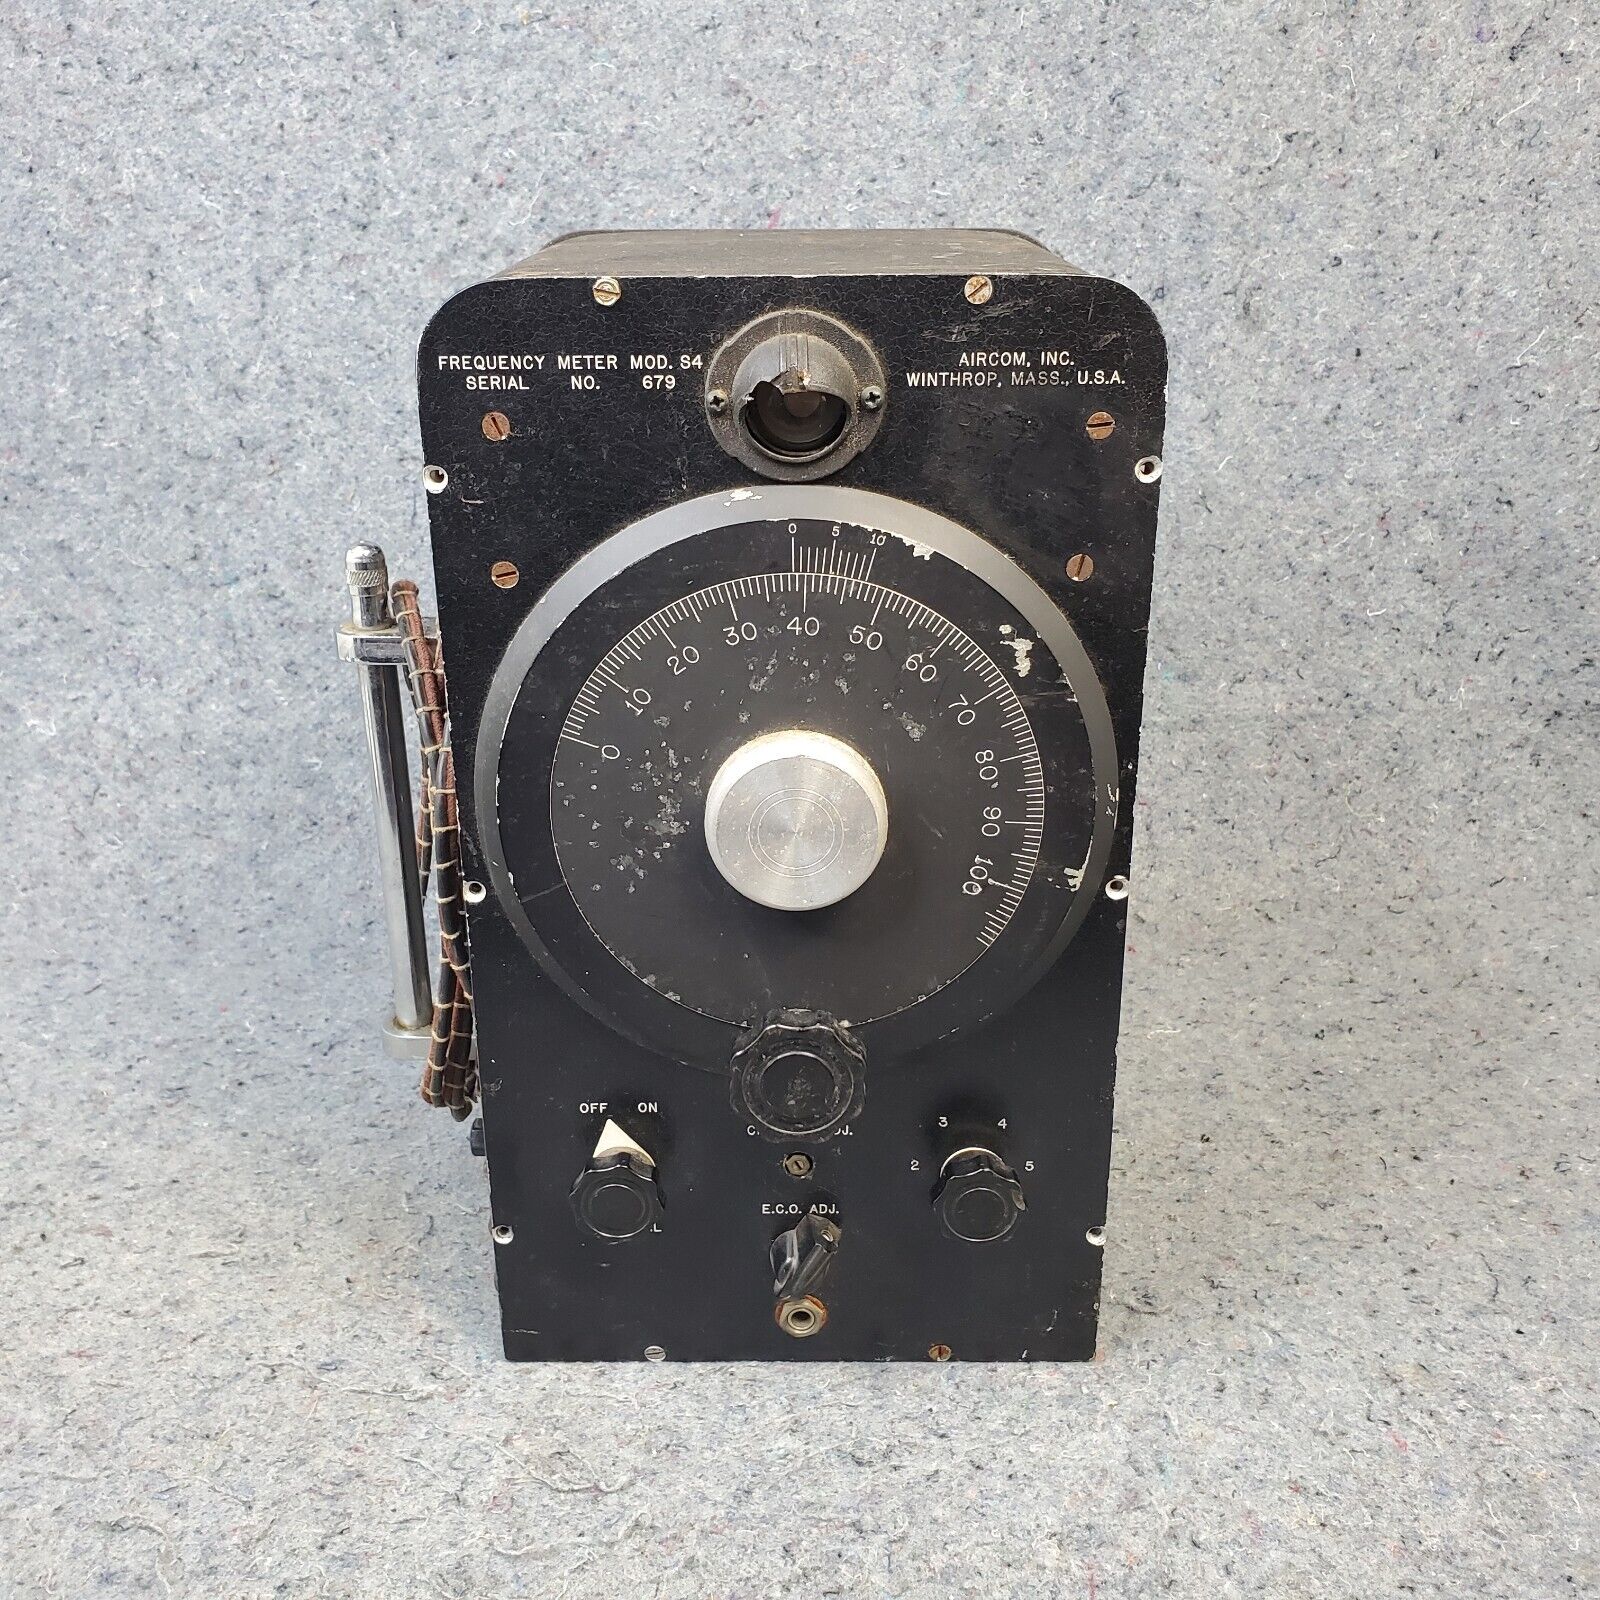 Vintage Aircom INC Crystal Radio Frequency Meter S4  WWII Era 1940's UNTESTED